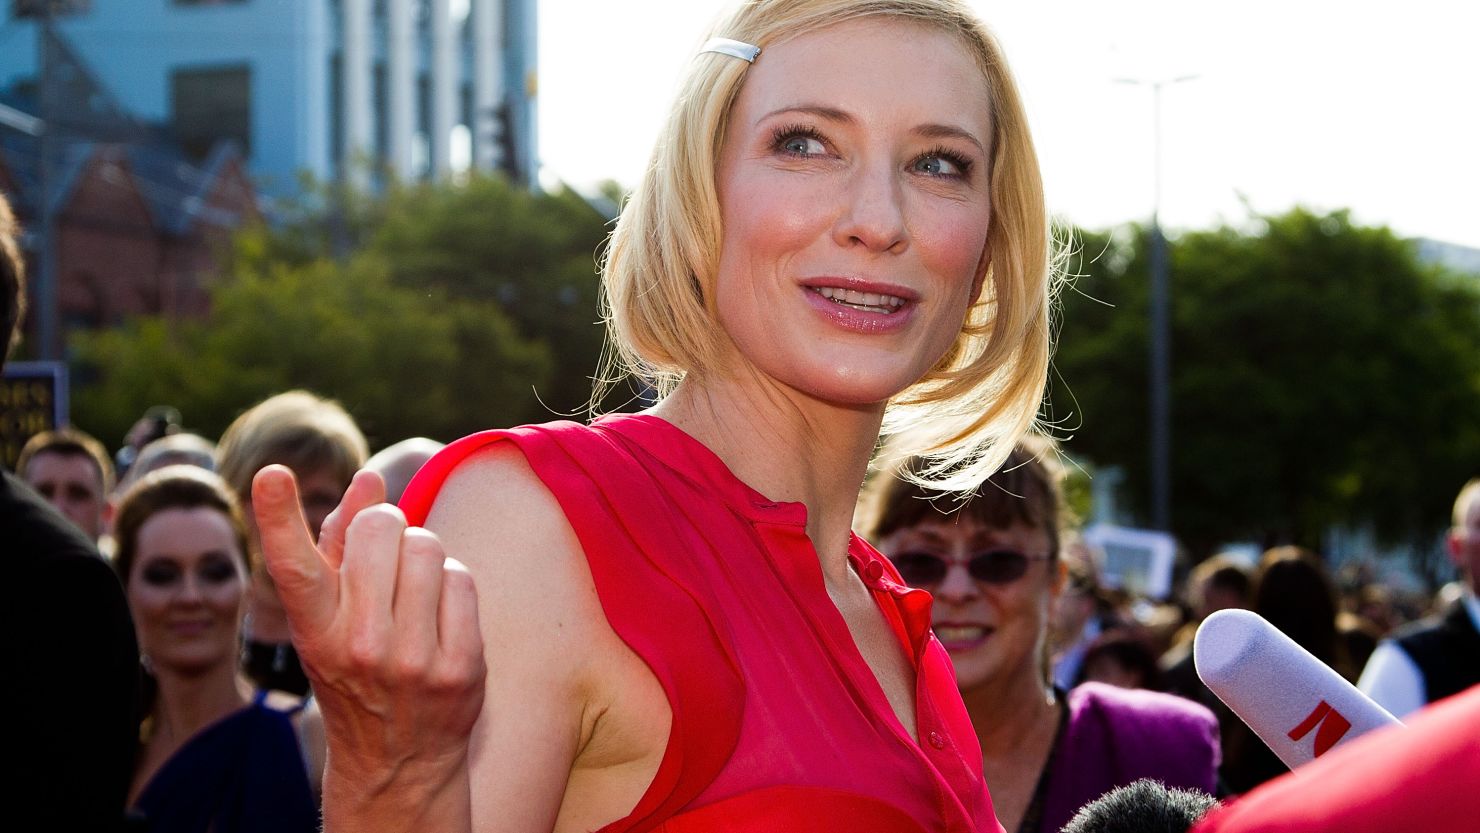 Cate Blanchett, who plays the evil stepmother in "Cinderella," wasn't amused by an interviewer's questions.